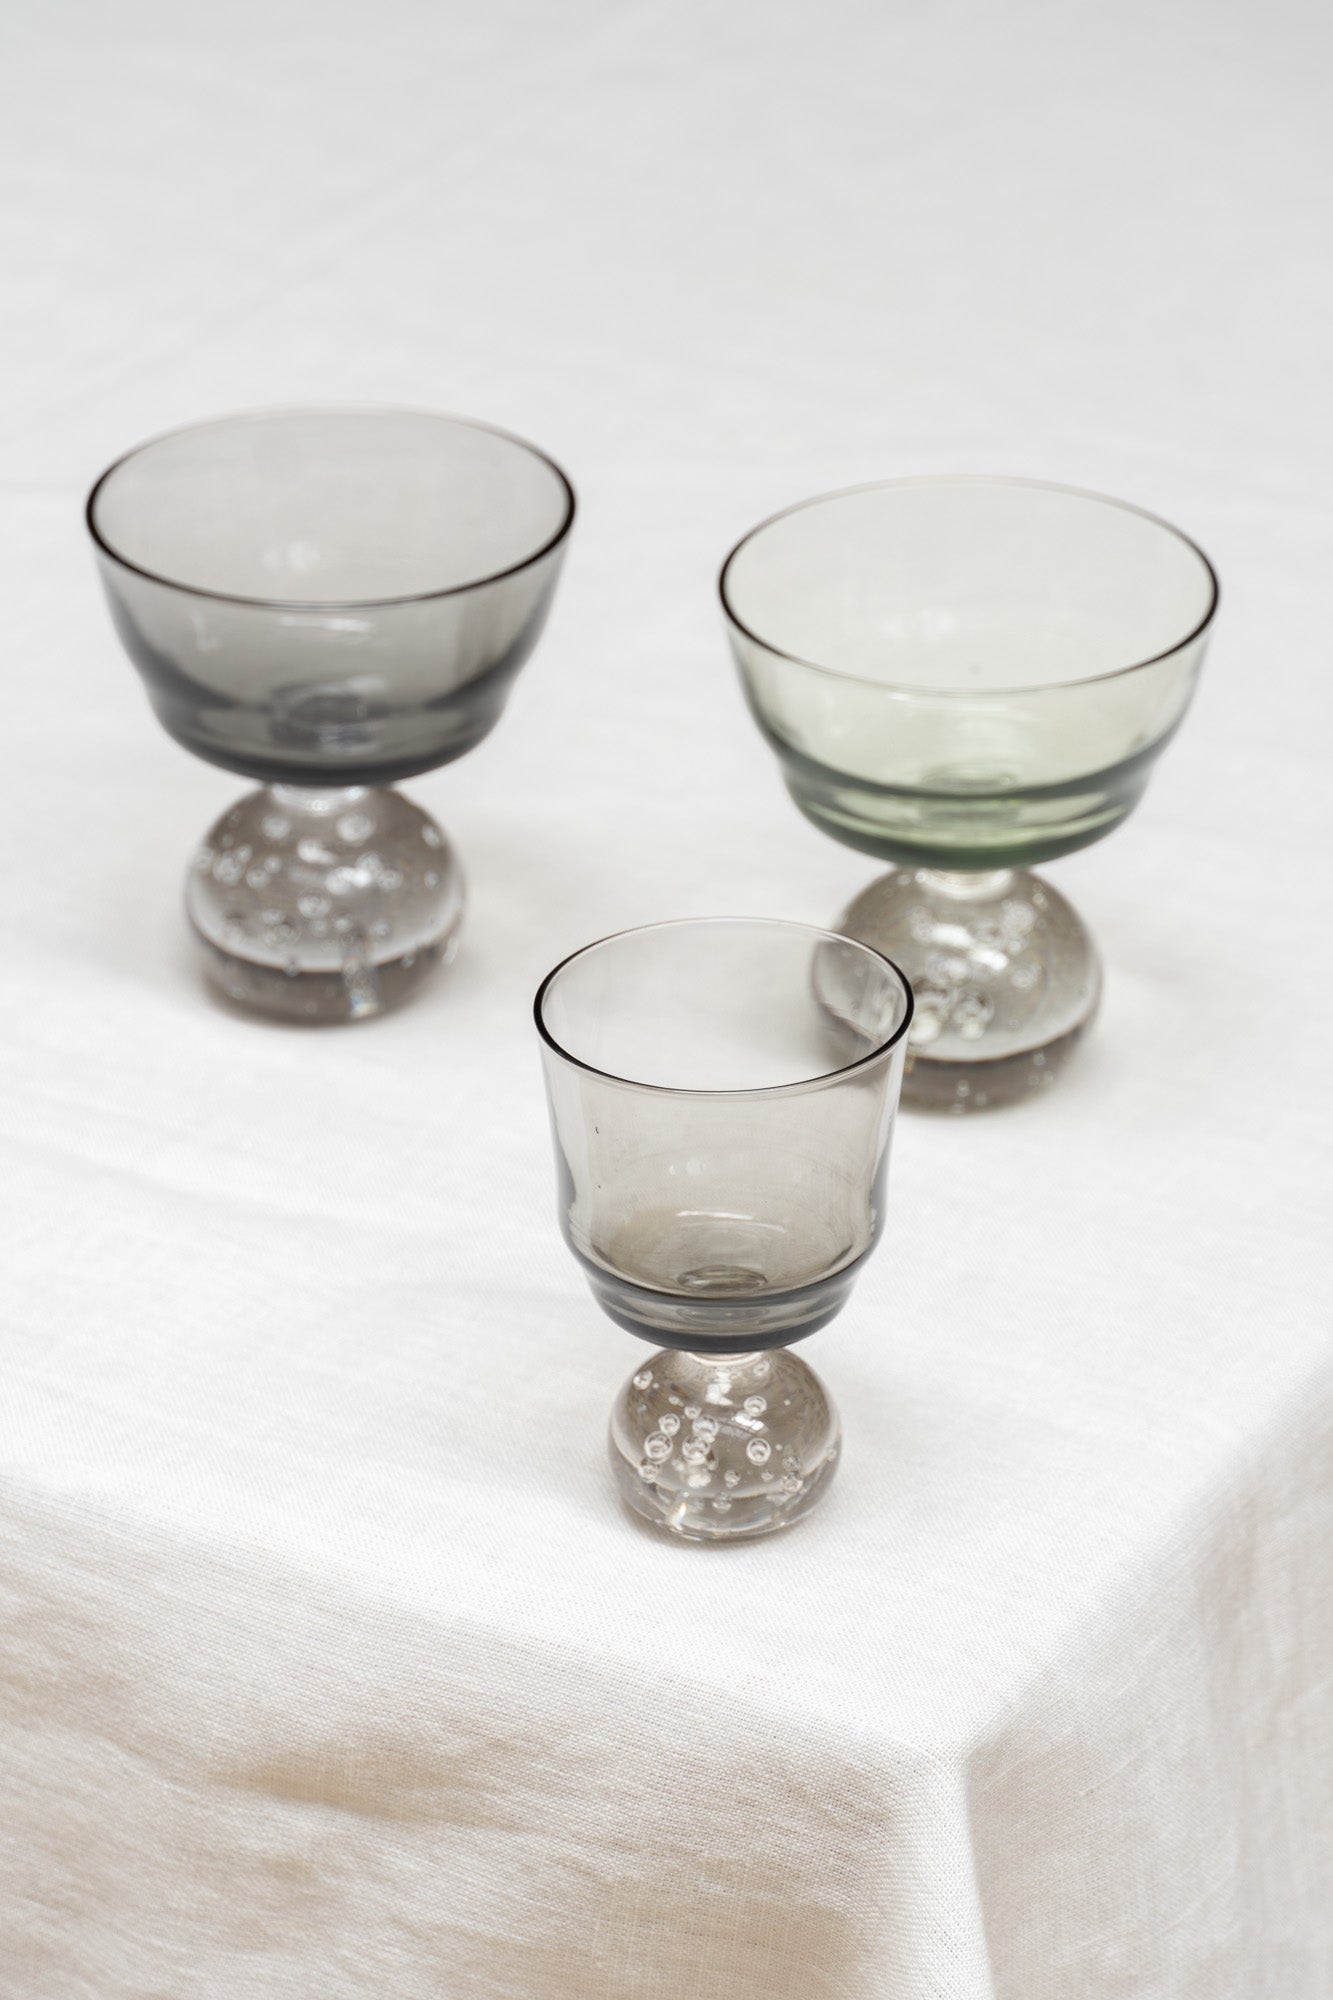 Close-up of the Smoky Glasses by Serax.